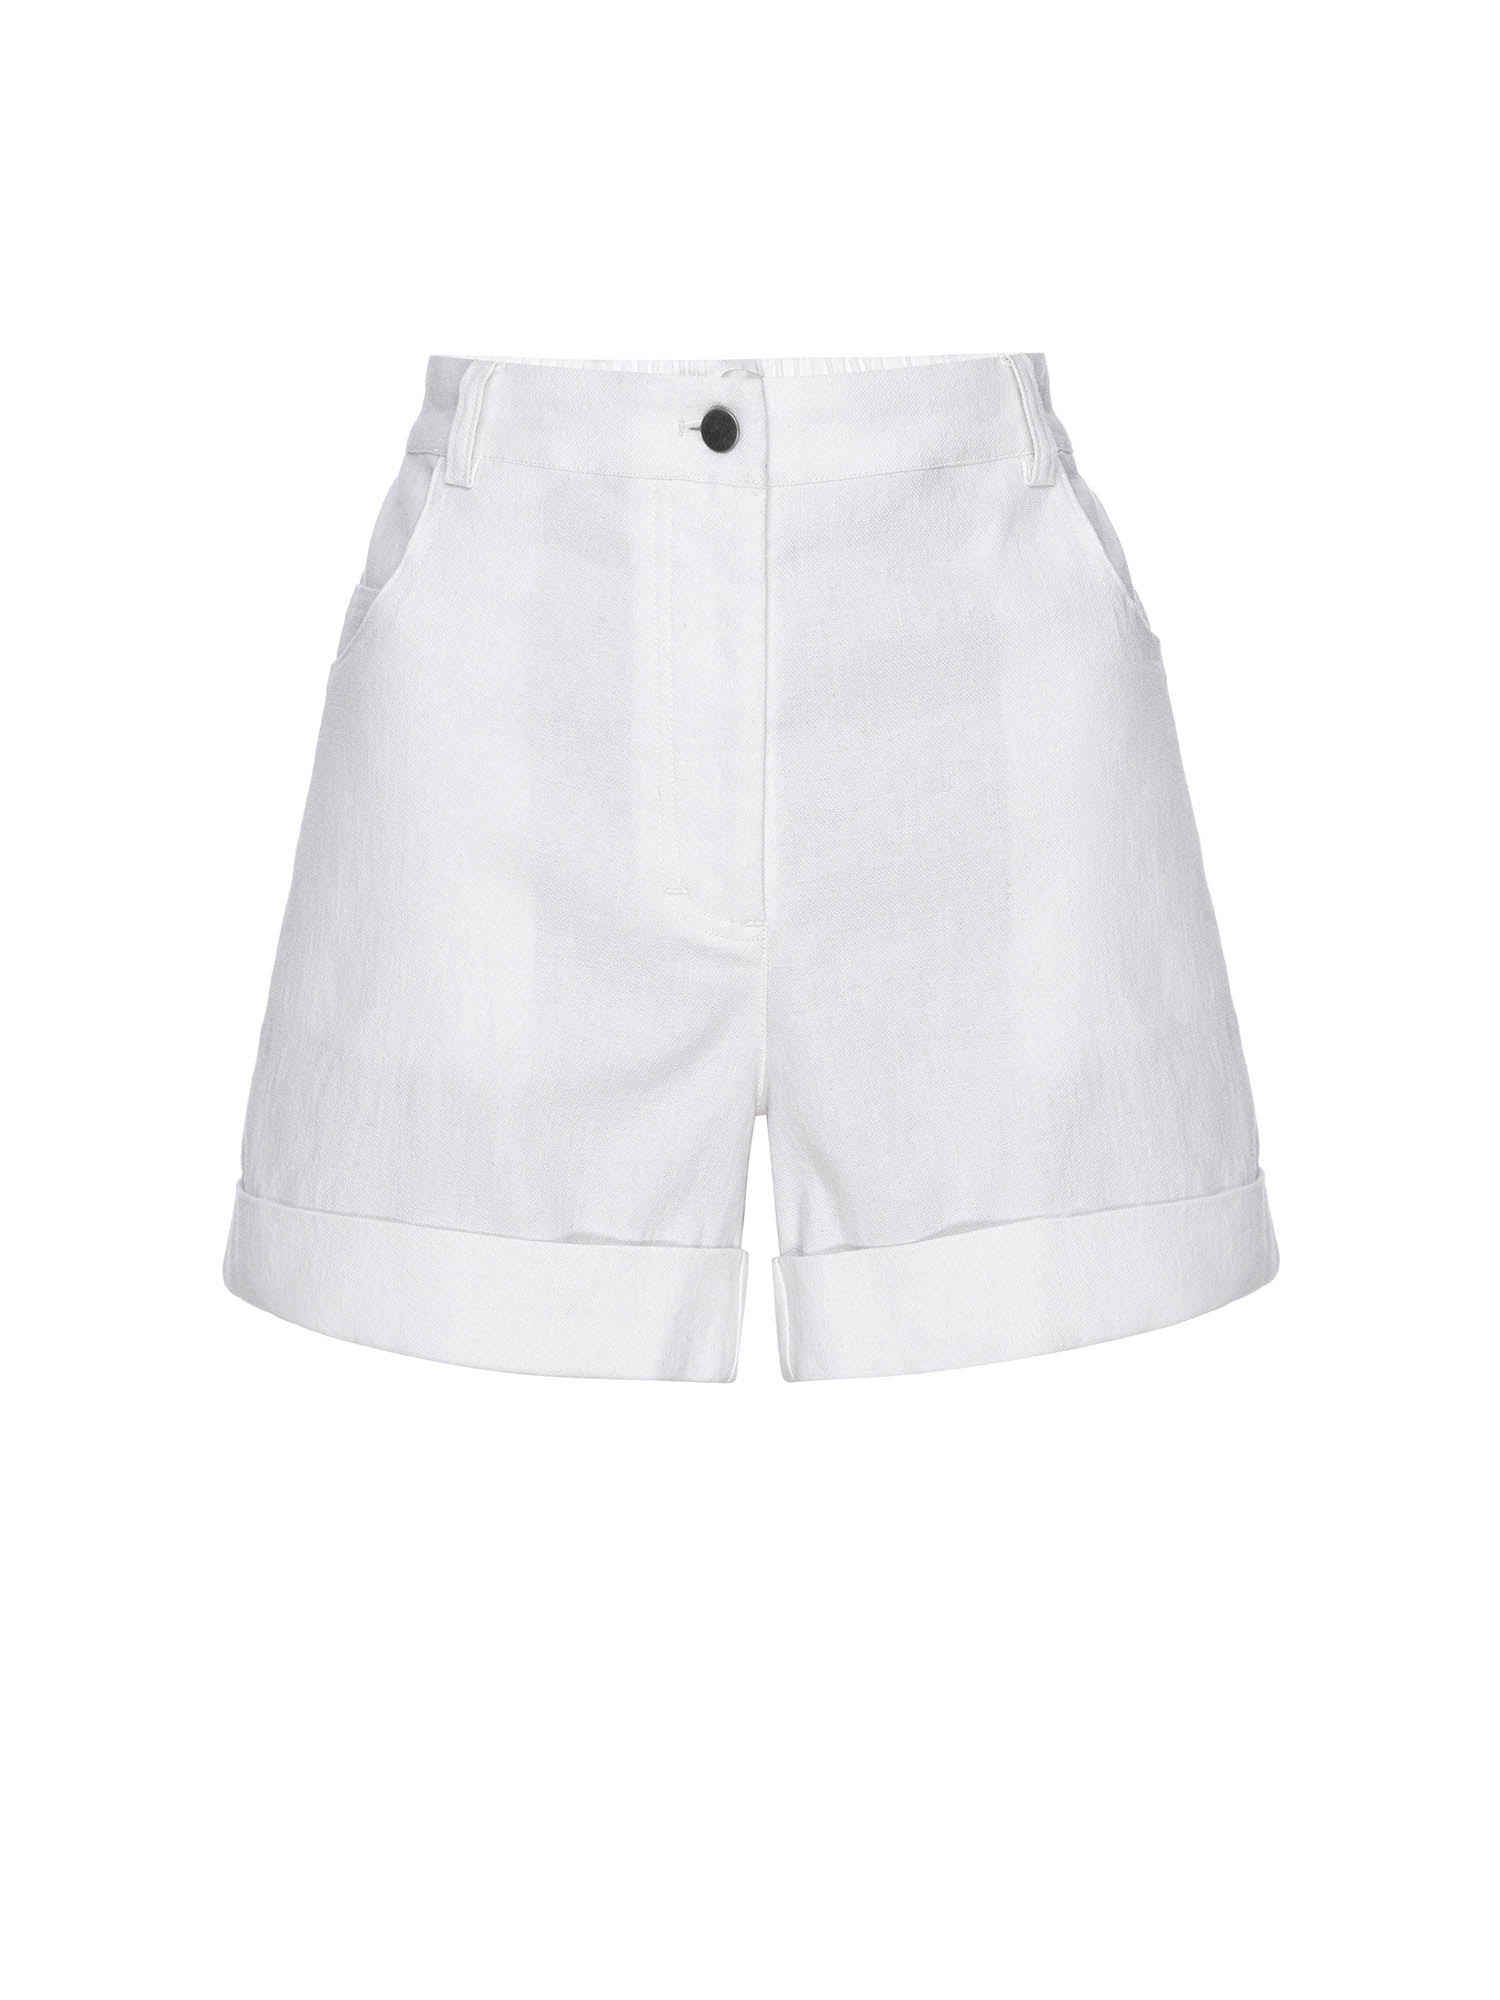 Pippa rolled and tacked cuffs white short flat view 